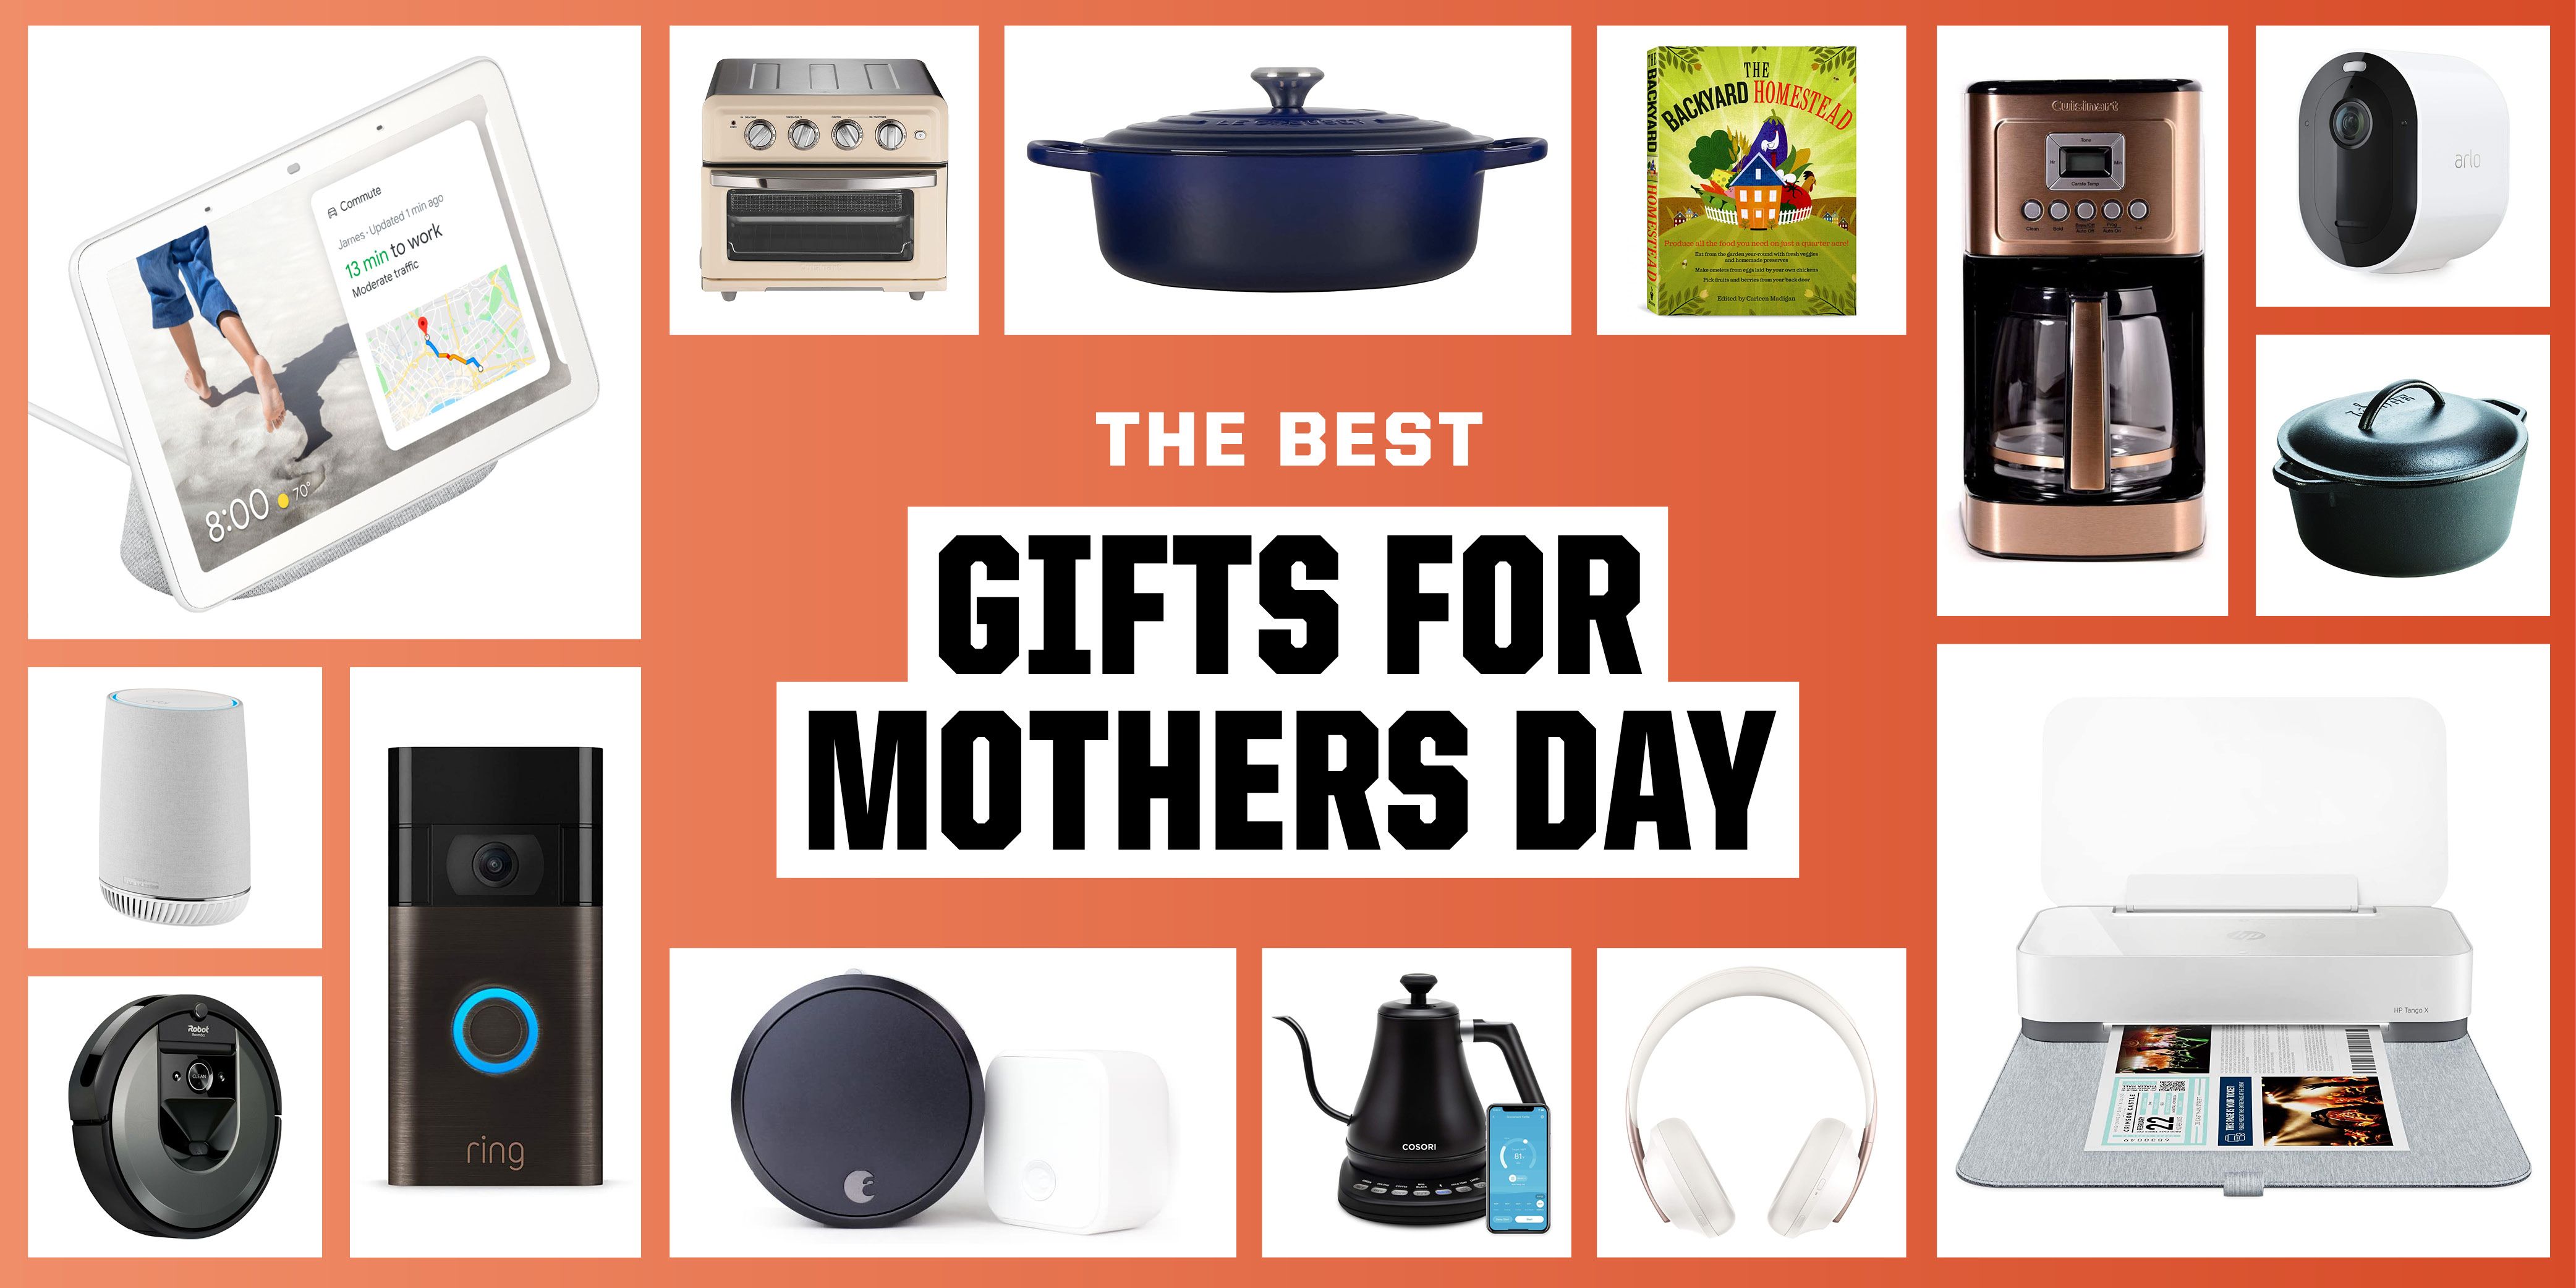 14 Best Luxury Mother's Day Gifts | Chic Gift Ideas For Mom